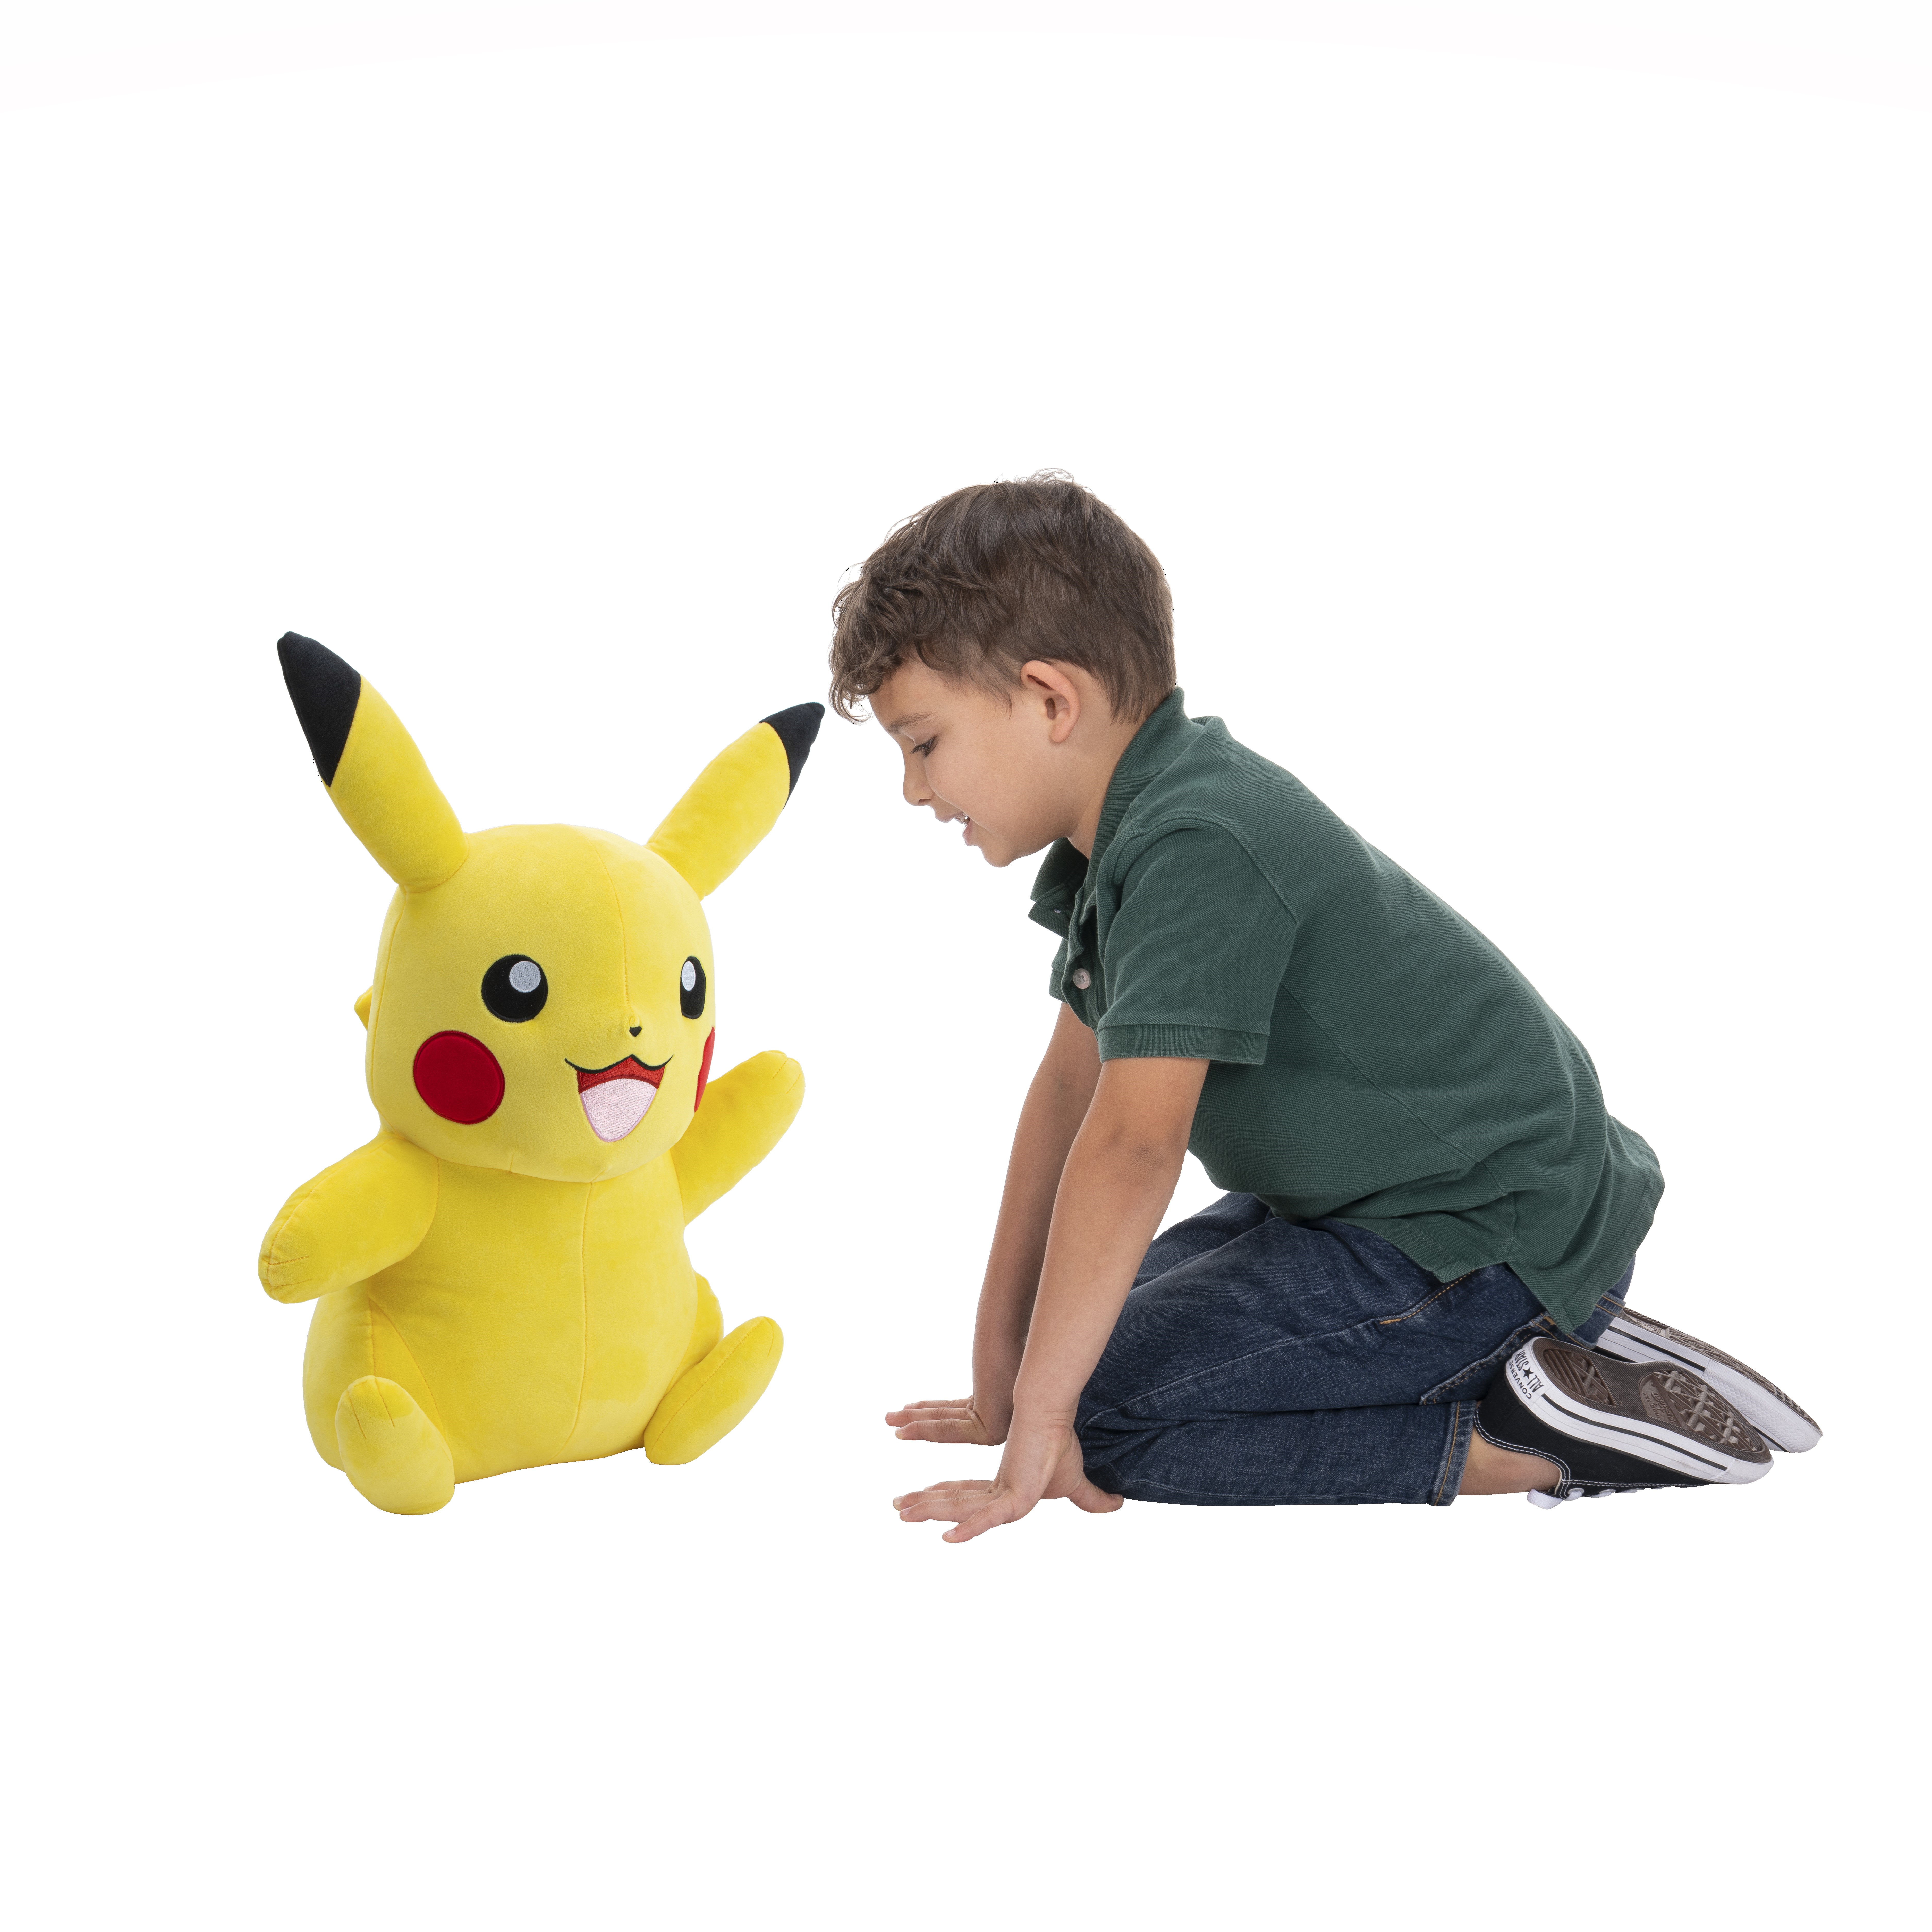 Pokemon Pikachu Plush - 24-inch Child's Plush with Authentic Details - image 5 of 5